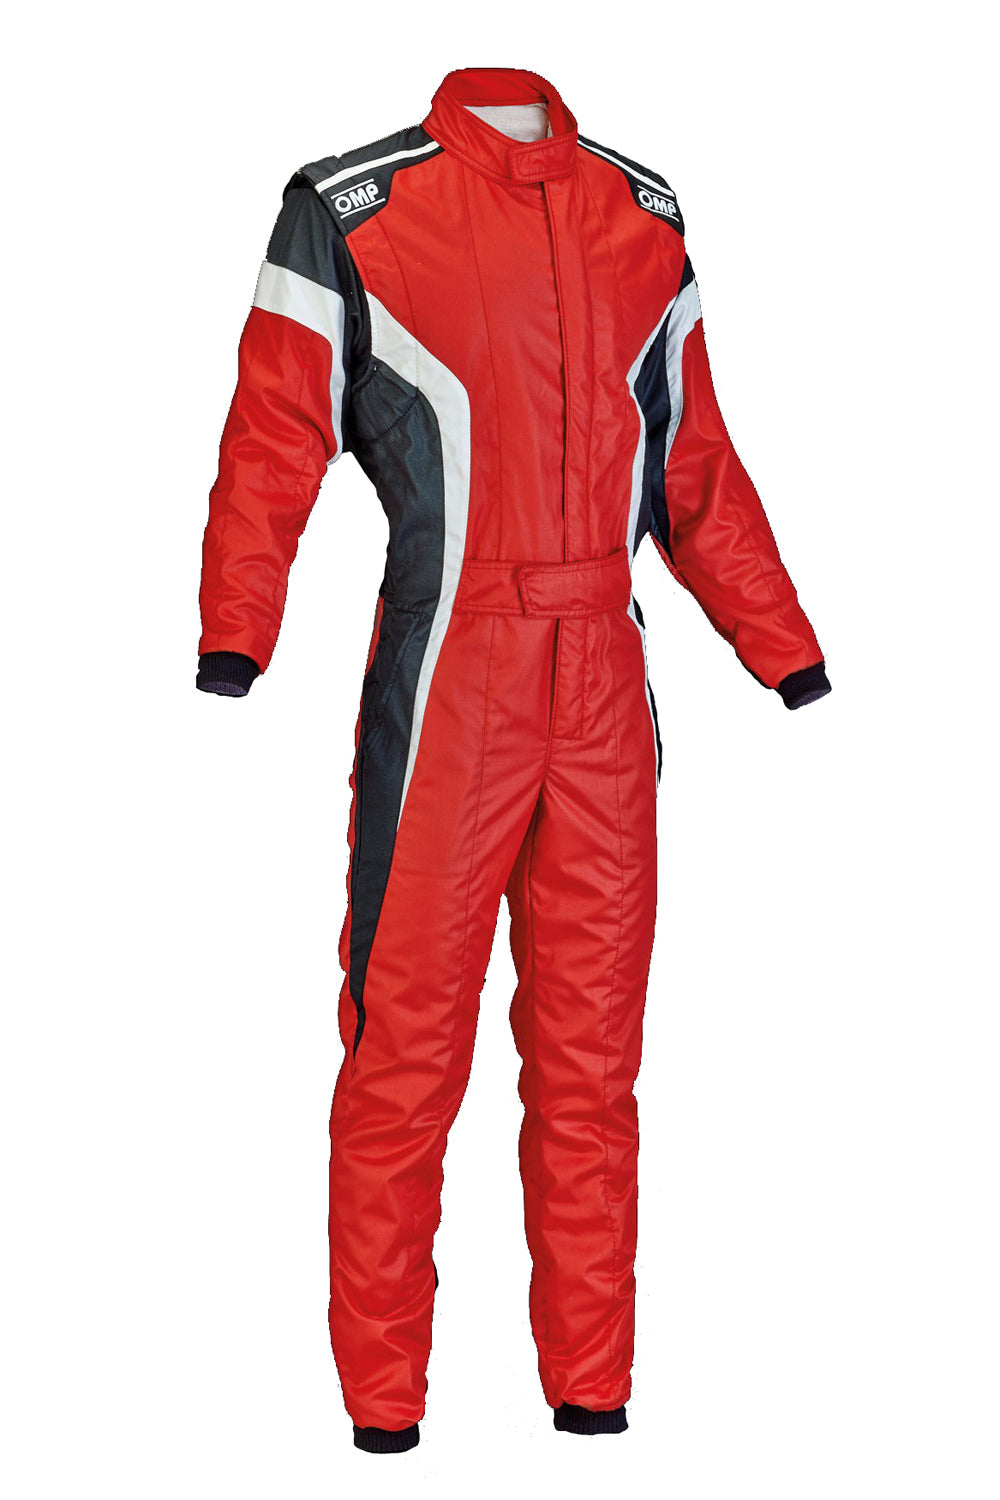 TECNICA-S Suit Red White Size 48